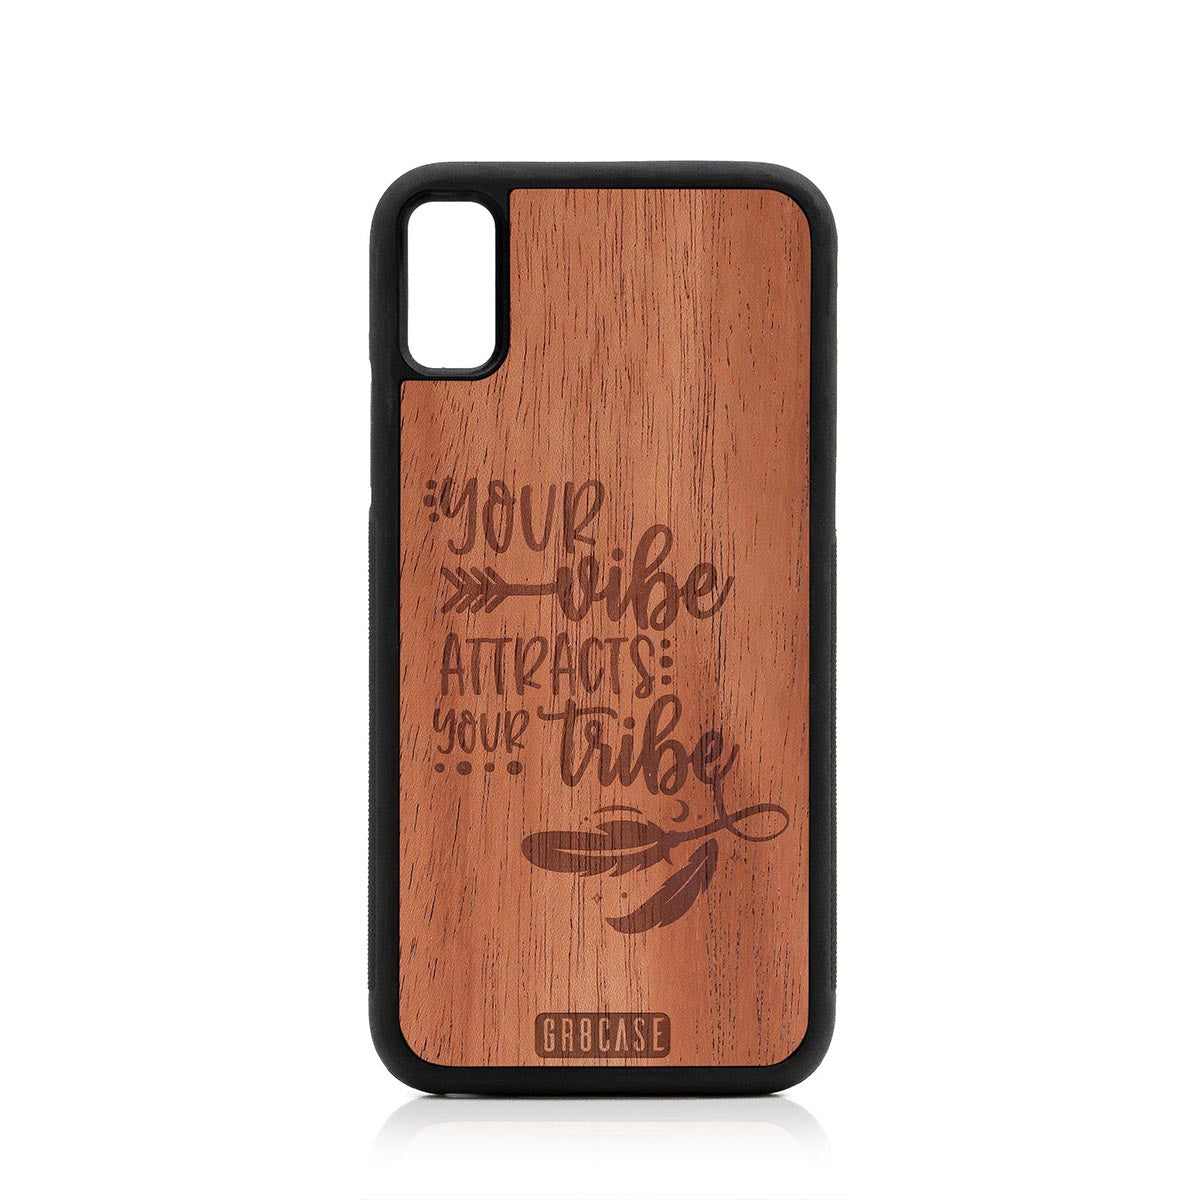 Your Vibe Attracts Your Tribe Design Wood Case For iPhone XR